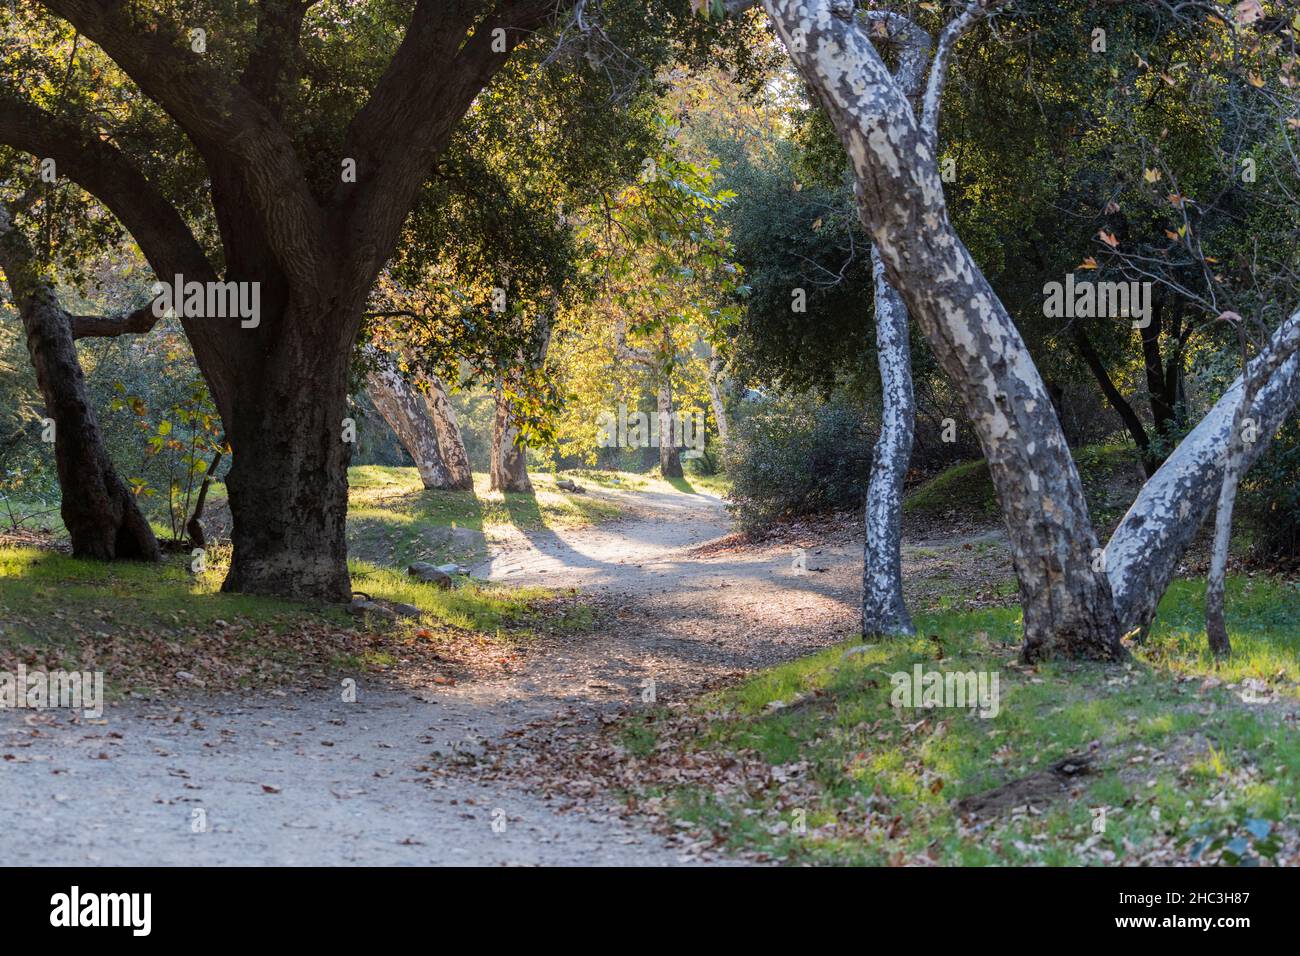 Forest path through Sycamore and Oak trees in the La Canada Flintridge area of Los Angeles County, California. Stock Photo